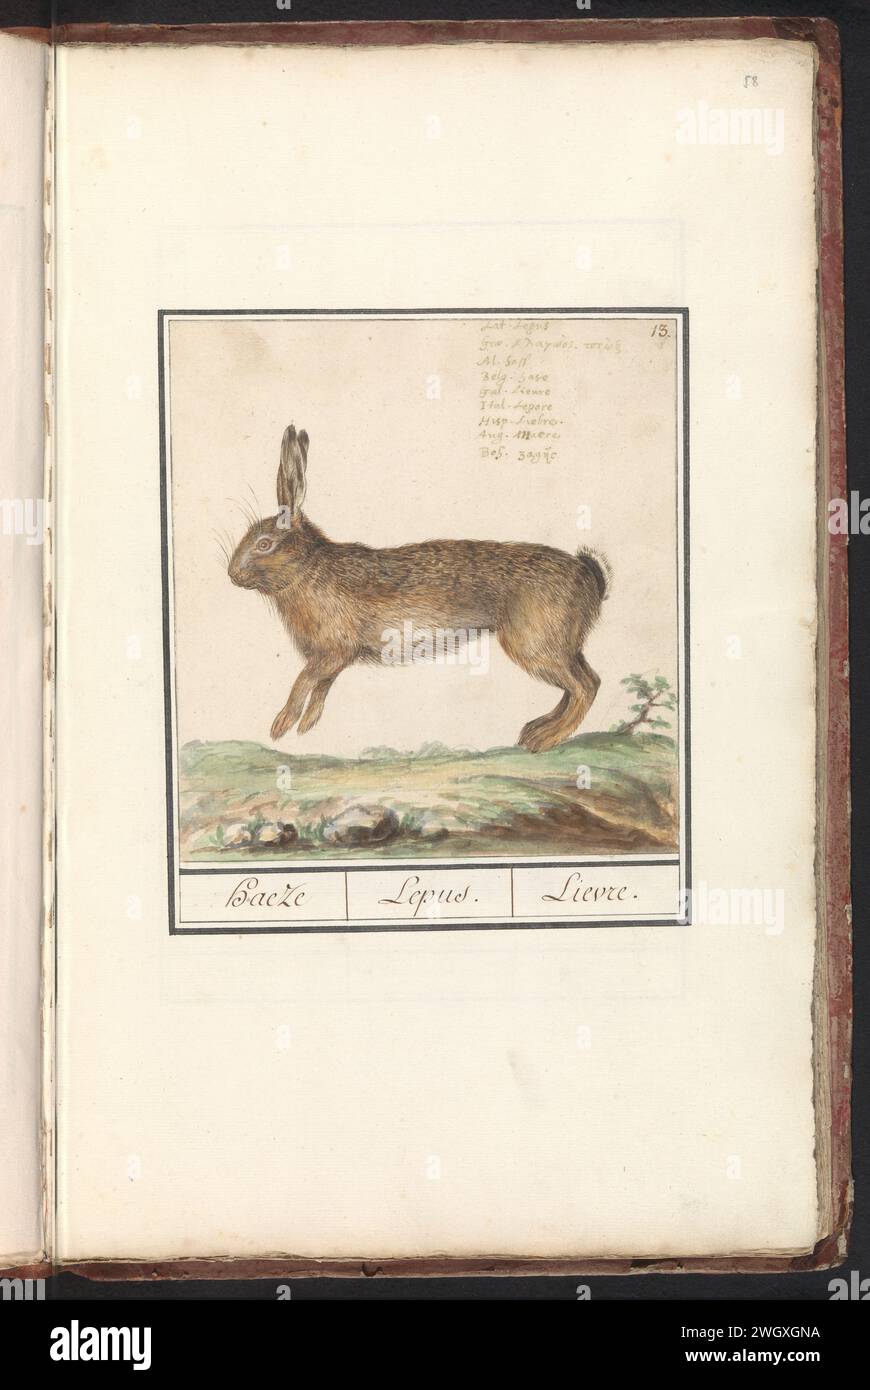 Haas (Rabbit europseus), Anselm Boëtius de Boodt, 1596 - 1610 drawing Hare. Numbered at the top right: 13. At the top right the name in nine languages. Part of the first album with drawings of four -legged friends. First of twelve albums with drawings of animals, birds and plants known around 1600, commissioned by Emperor Rudolf II. With explanation in Dutch, Latin and French. draughtsman: Praagdraughtsman: Delft paper. watercolor (paint). deck paint. ink brush / pen rodents: hare Stock Photo